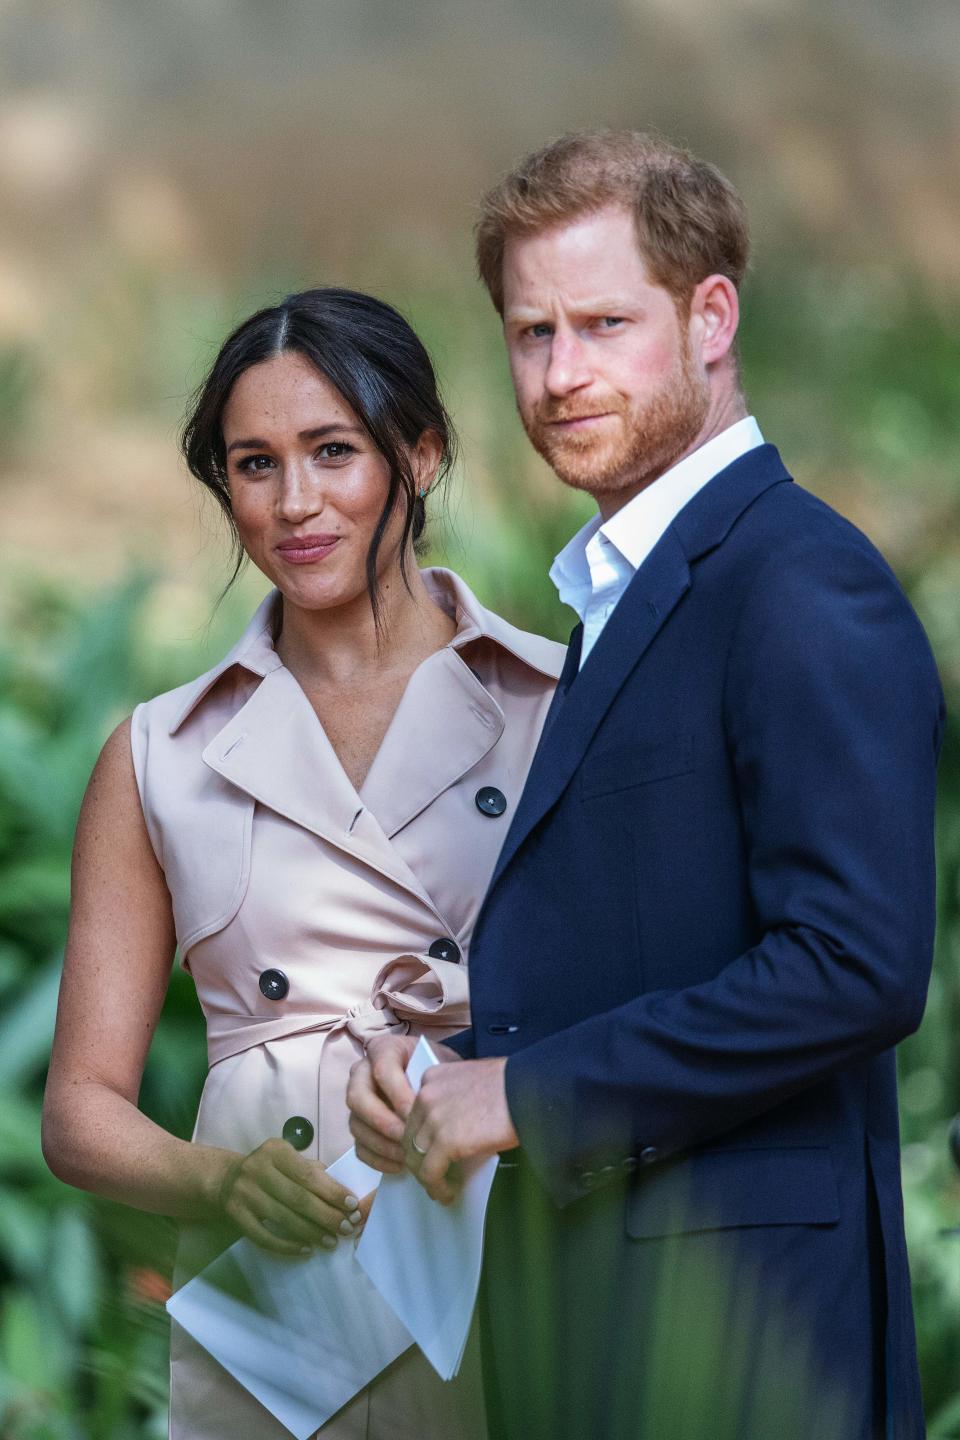 Britain's Prince Harry, Duke of Sussex(R) and Meghan, the Duchess of Sussex(L) arrive at the British High Commissioner residency in Johannesburg where they  will meet with Graca Machel, widow of former South African president Nelson Mandela, in Johannesburg, on October 2, 2019. - Prince Harry recalled the hounding of his late mother Diana to denounce media treatment of his wife Meghan Markle, as the couple launched legal action against a British tabloid for invasion of privacy. (Photo by Michele Spatari / AFP) (Photo by MICHELE SPATARI/AFP via Getty Images)